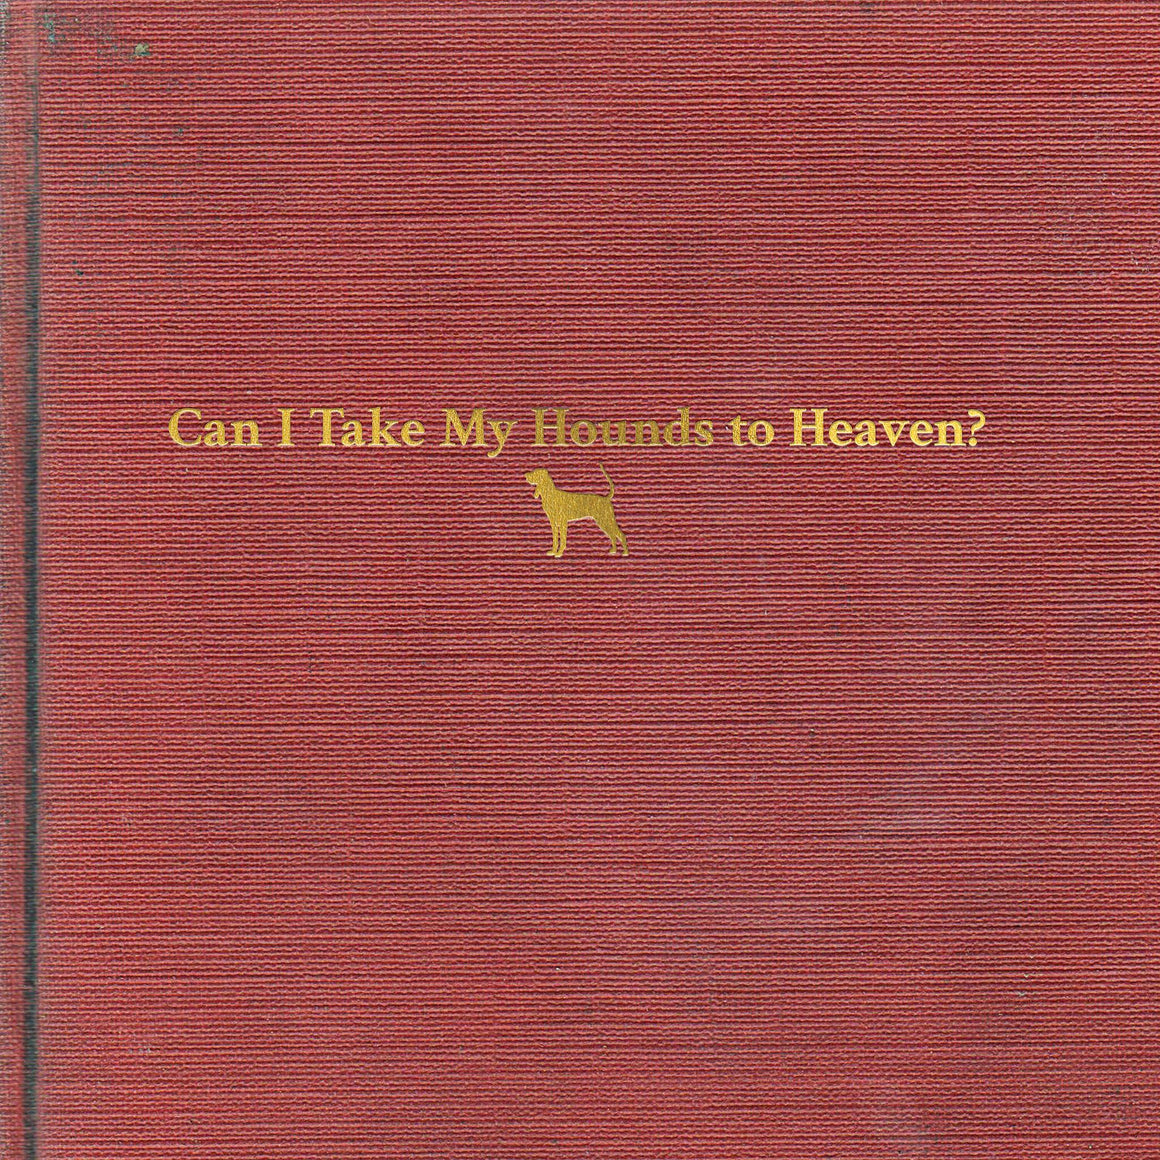 Tyler Childers Can I Take My Hounds To Heaven? New Vinyl 3LP M\M